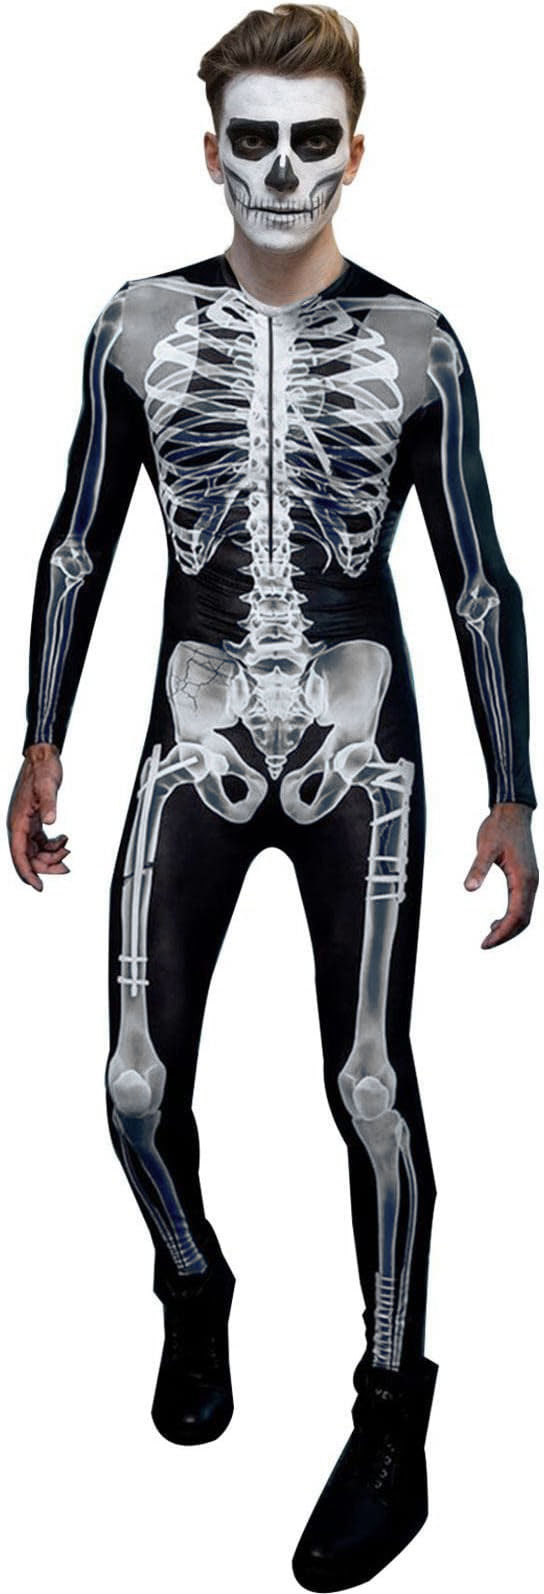 Men's X-Large Skeleton Bodysuit | Day of the Dead Halloween Costume - Fast & ... - Picture 1 of 1